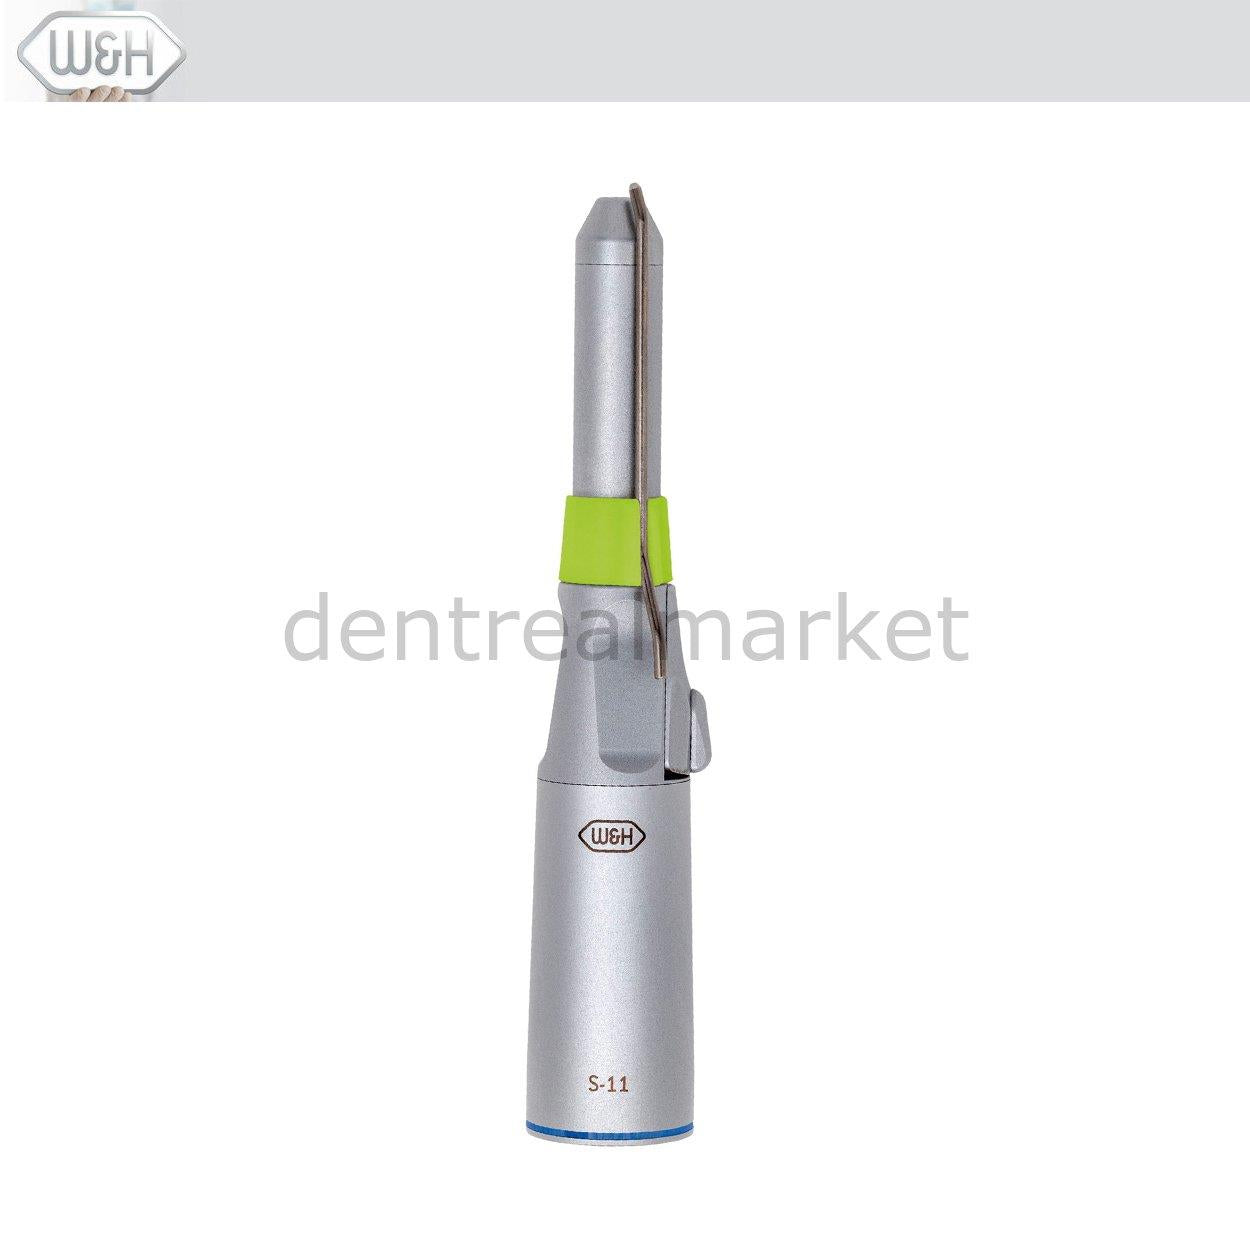 S11 Dental Surgical Straight Handpiece 1:1